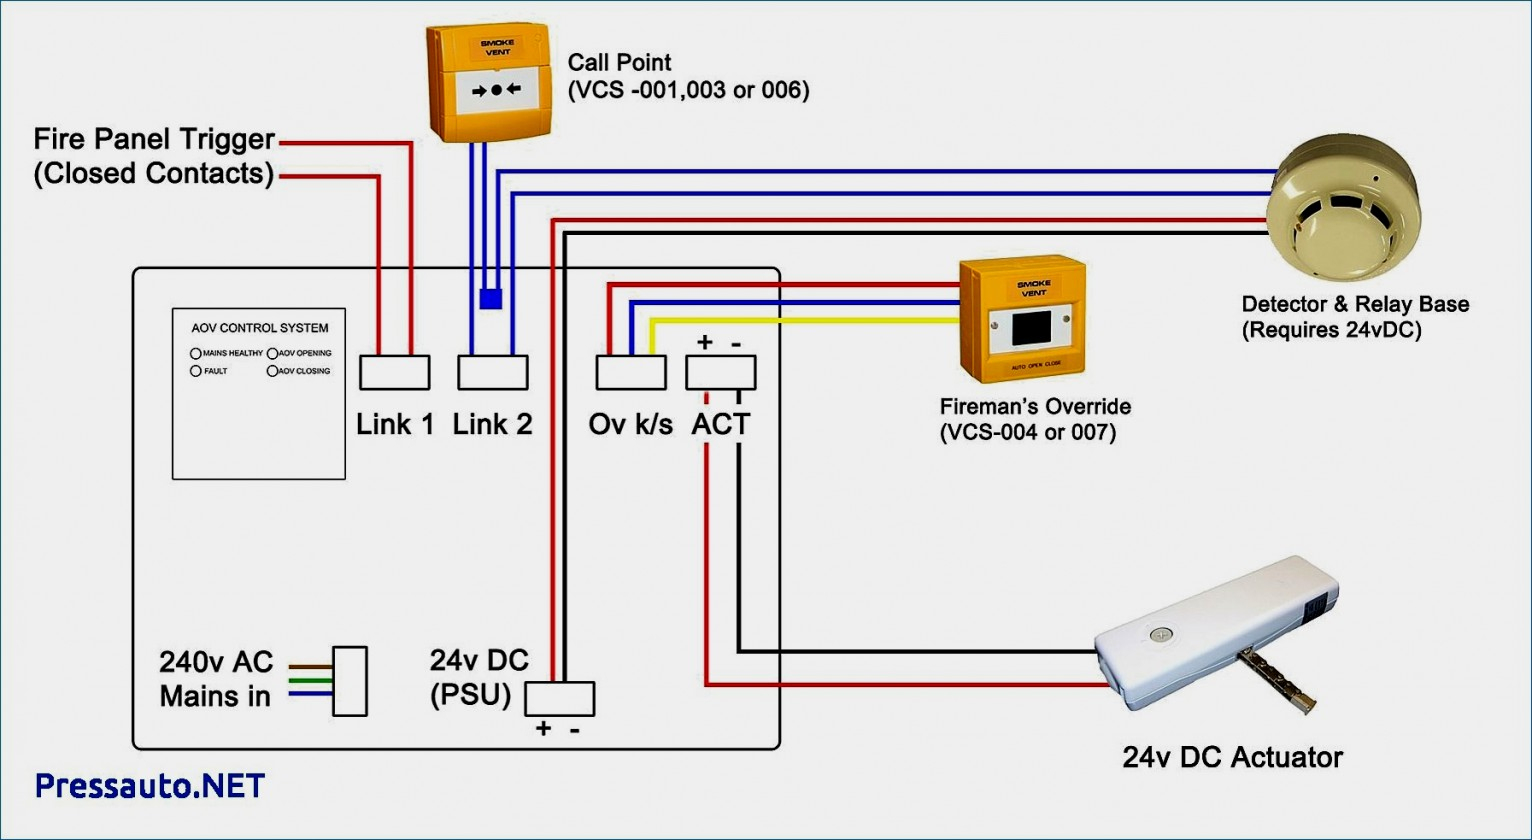 Wiring Diagram For Smoke Detectors Hard Wired - Wiring Diagrams Base - 2 Wire Smoke Detector Wiring Diagram